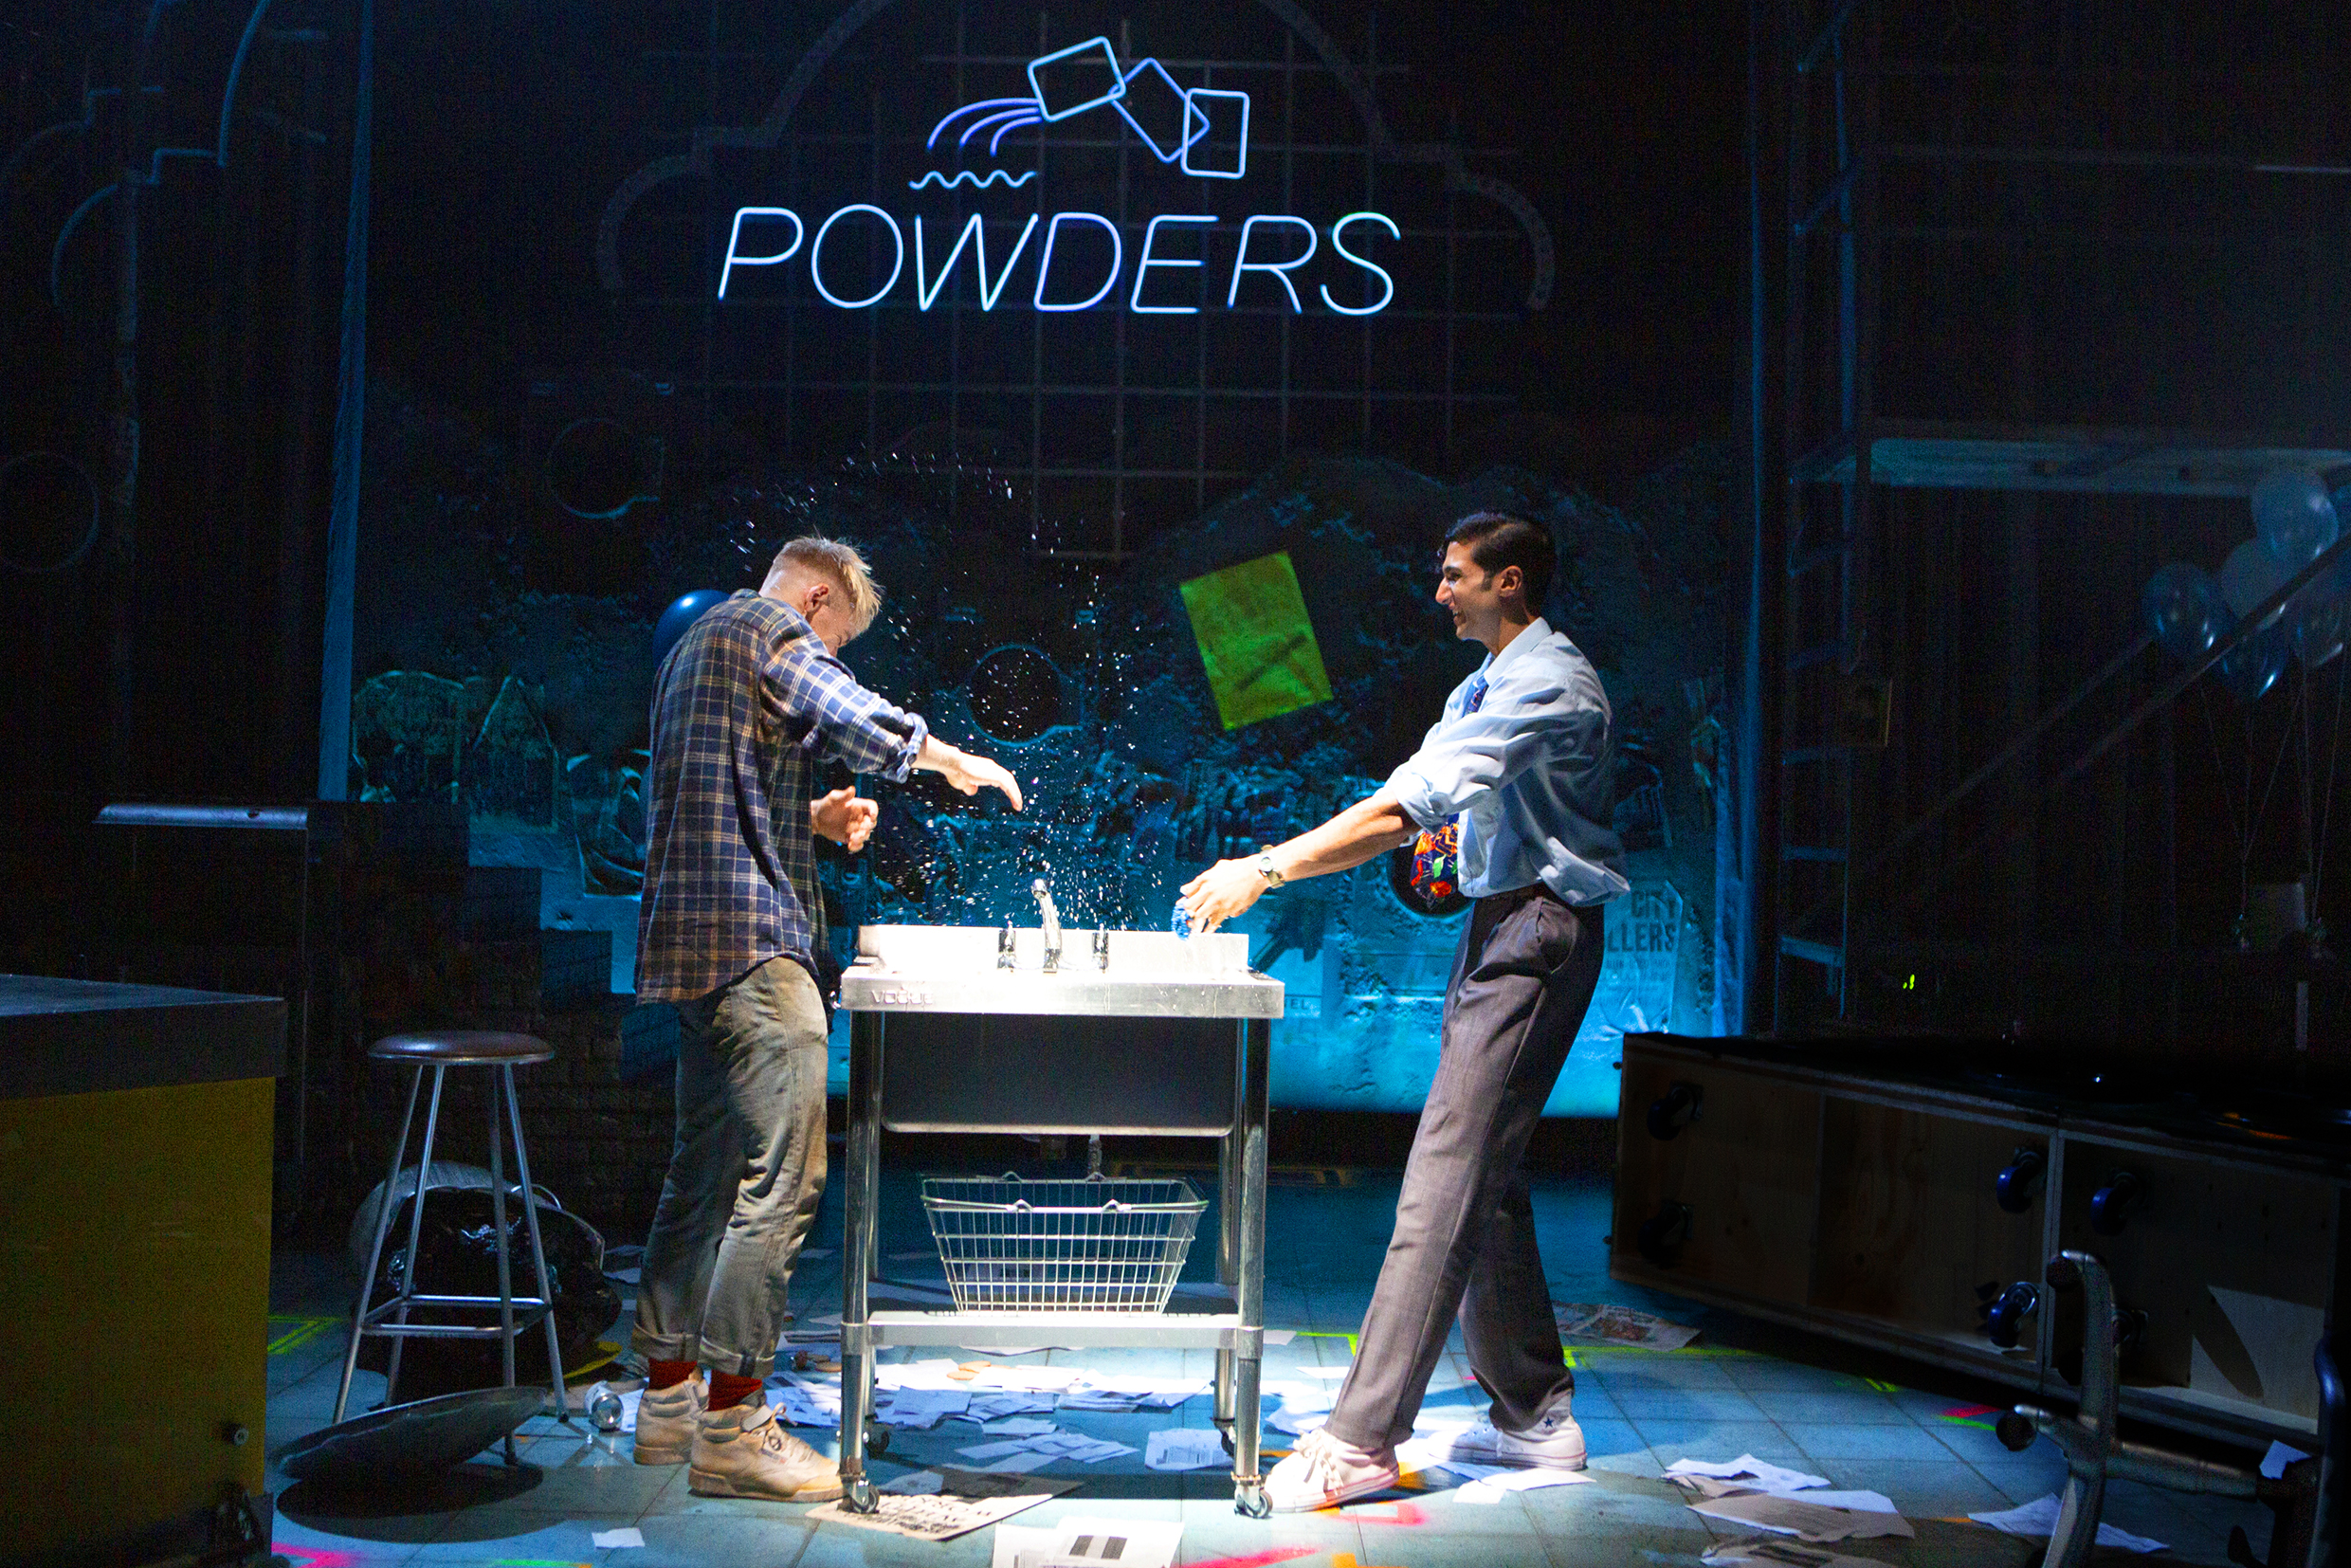 Production image from My Beautiful Laundrette. Johnny Fines as Jonny and Omar Malik as Omar splash each other with water from a drink on a darkly lit stage. A neon Powders sign is in the background.